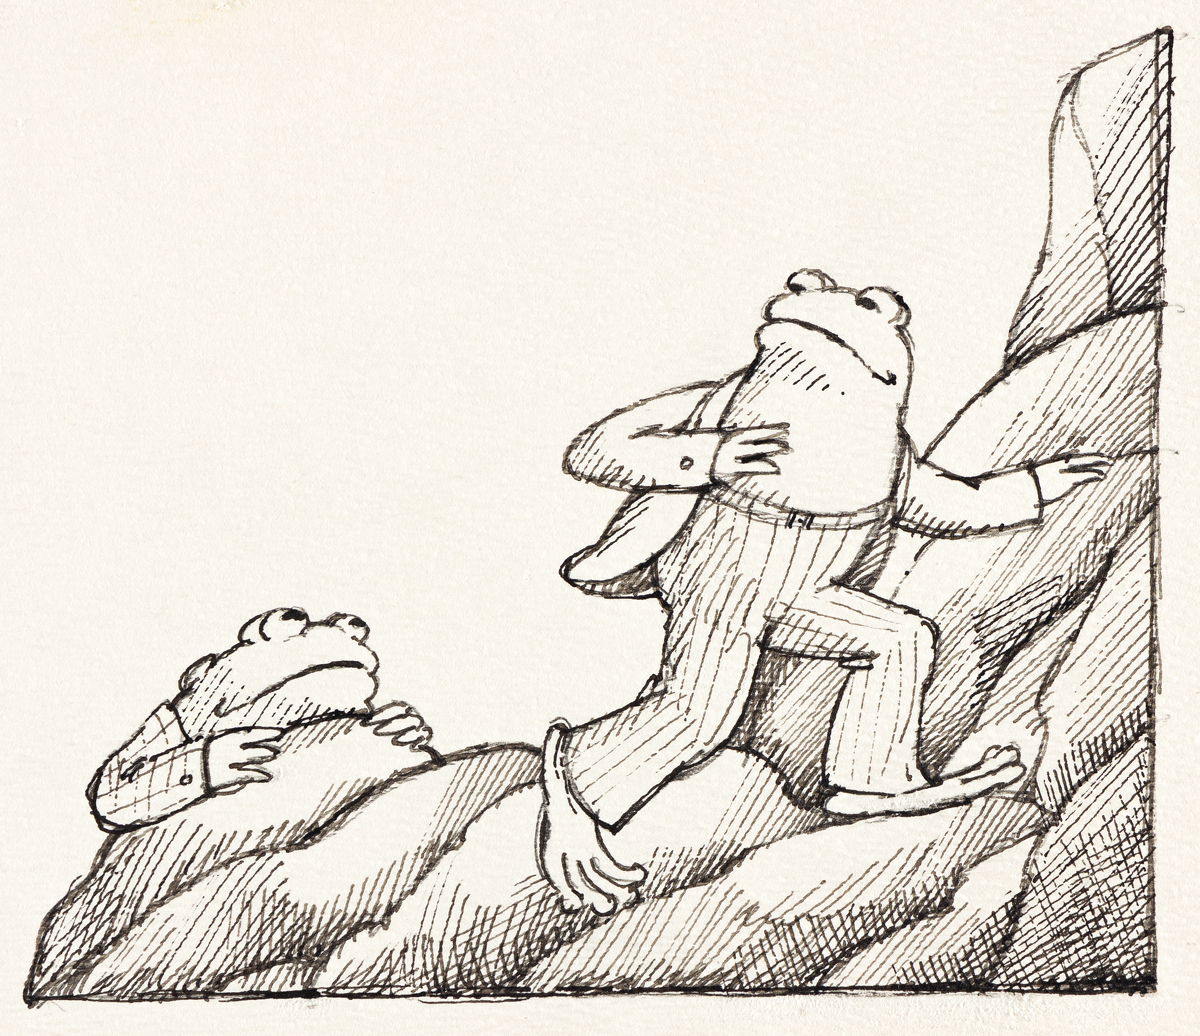 ARNOLD LOBEL (1933-1987) We can try to climb this mountain. [CHILDRENS]